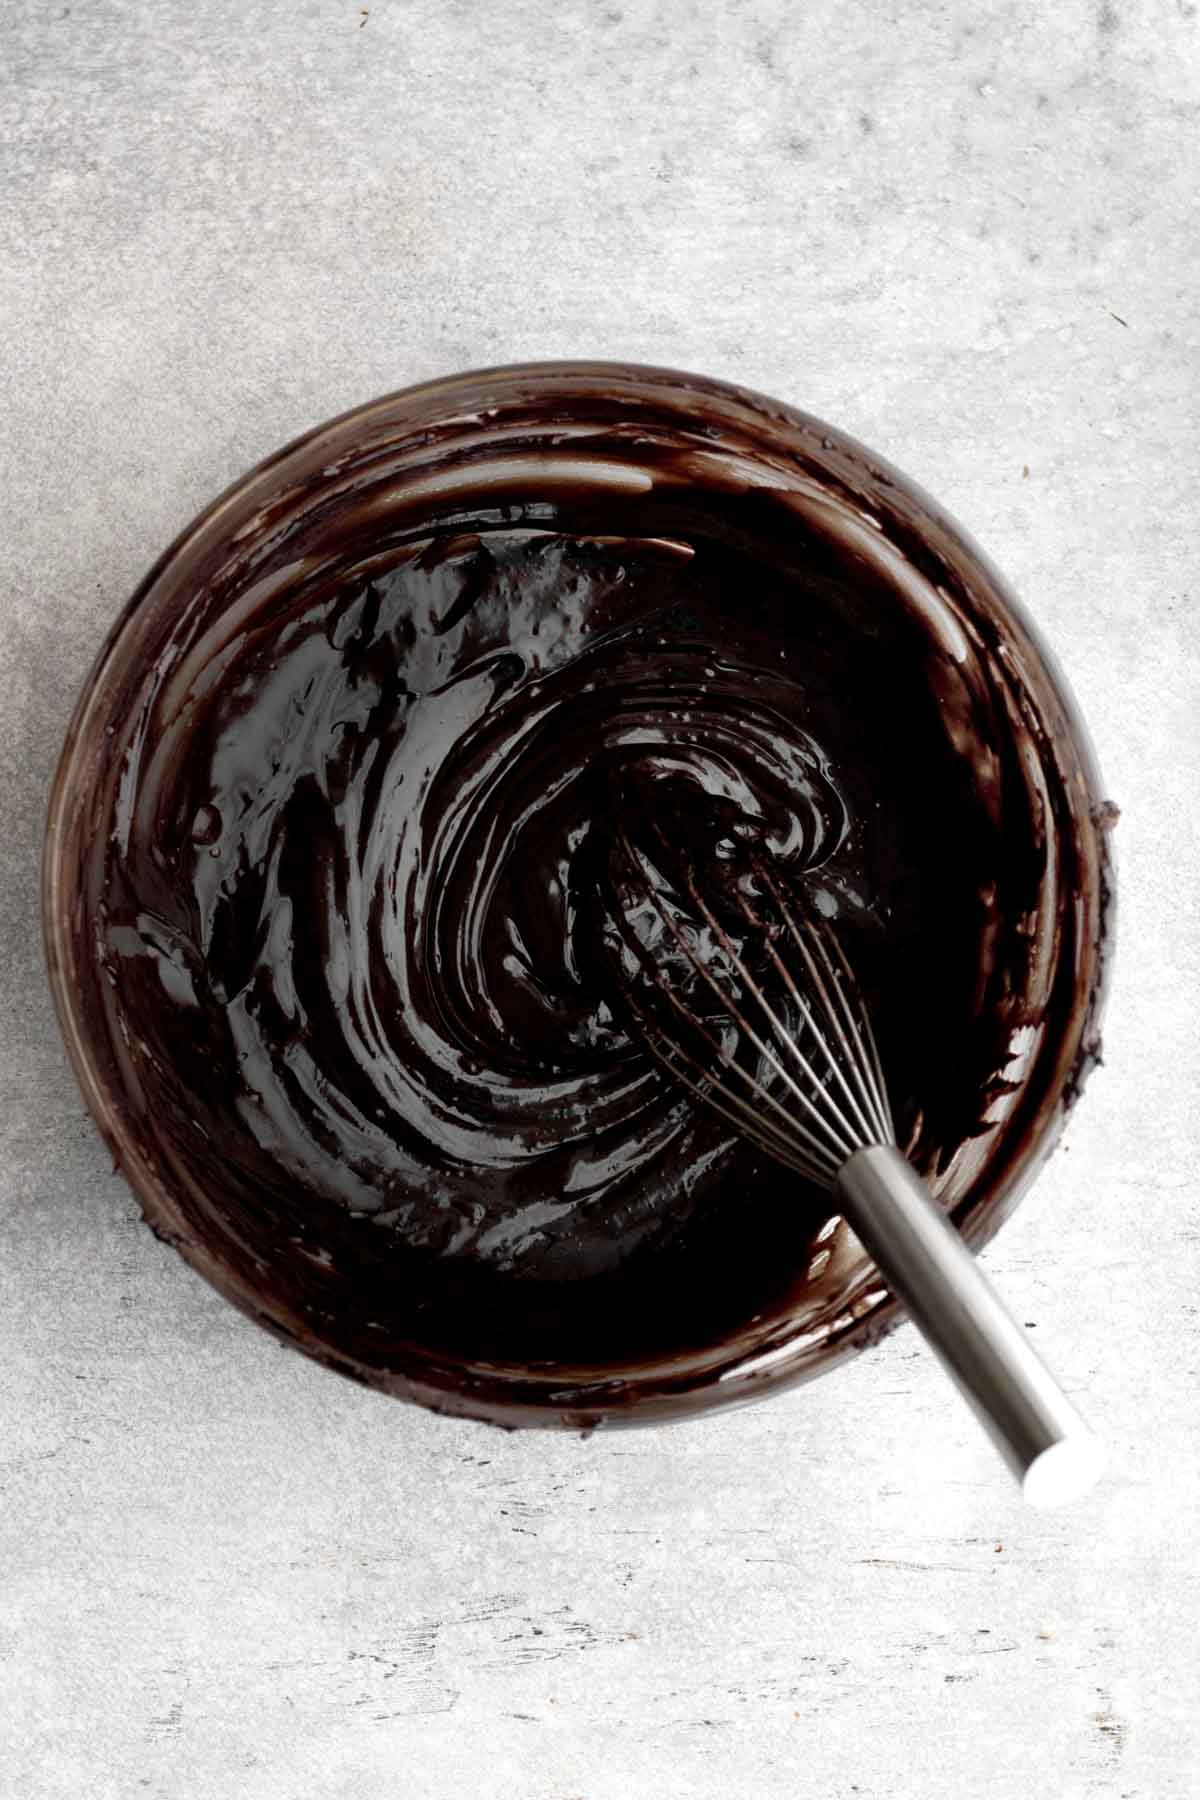 Whisking the cocoa powder and melted chocolate together.